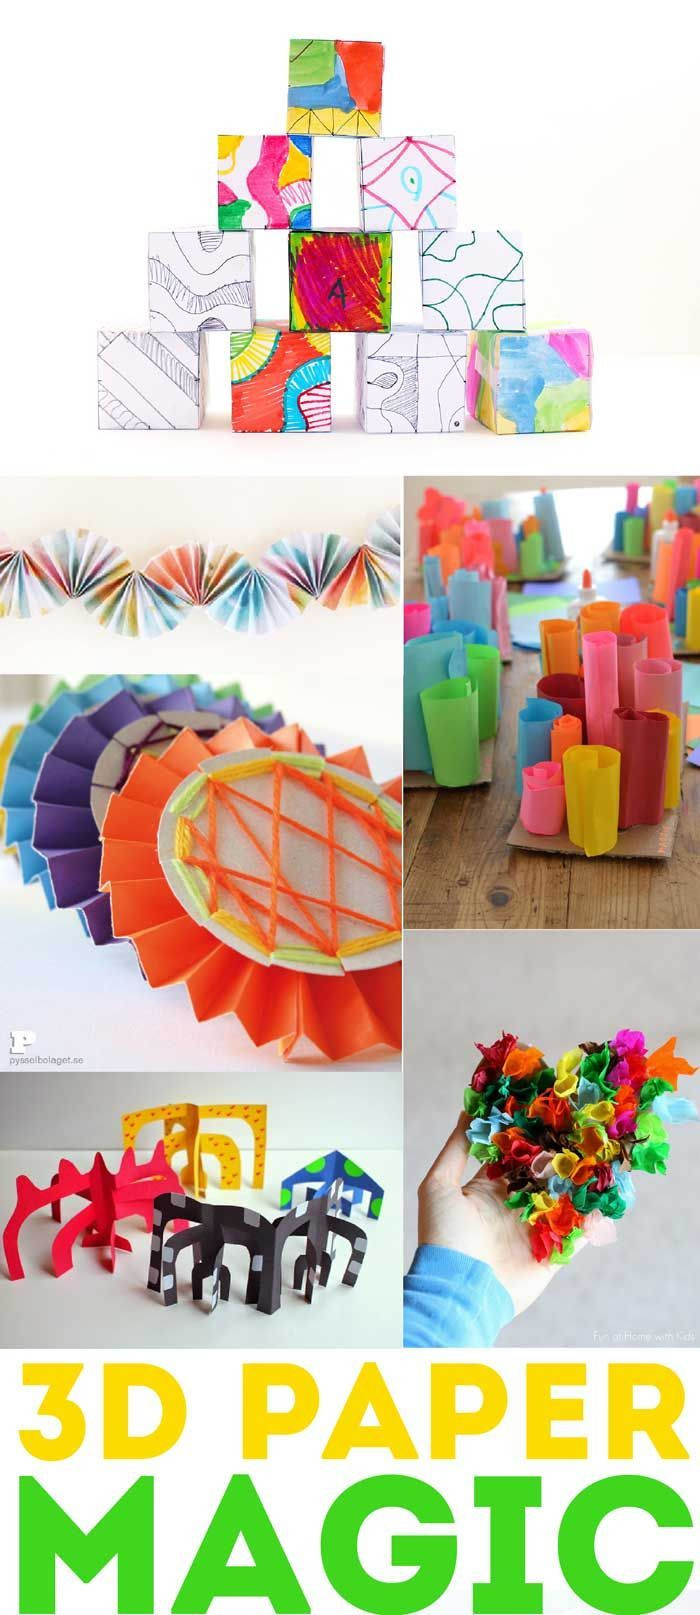 Construction Paper Craft Ideas For Adults
 60 Amazing Paper Crafts For Kids and Adults